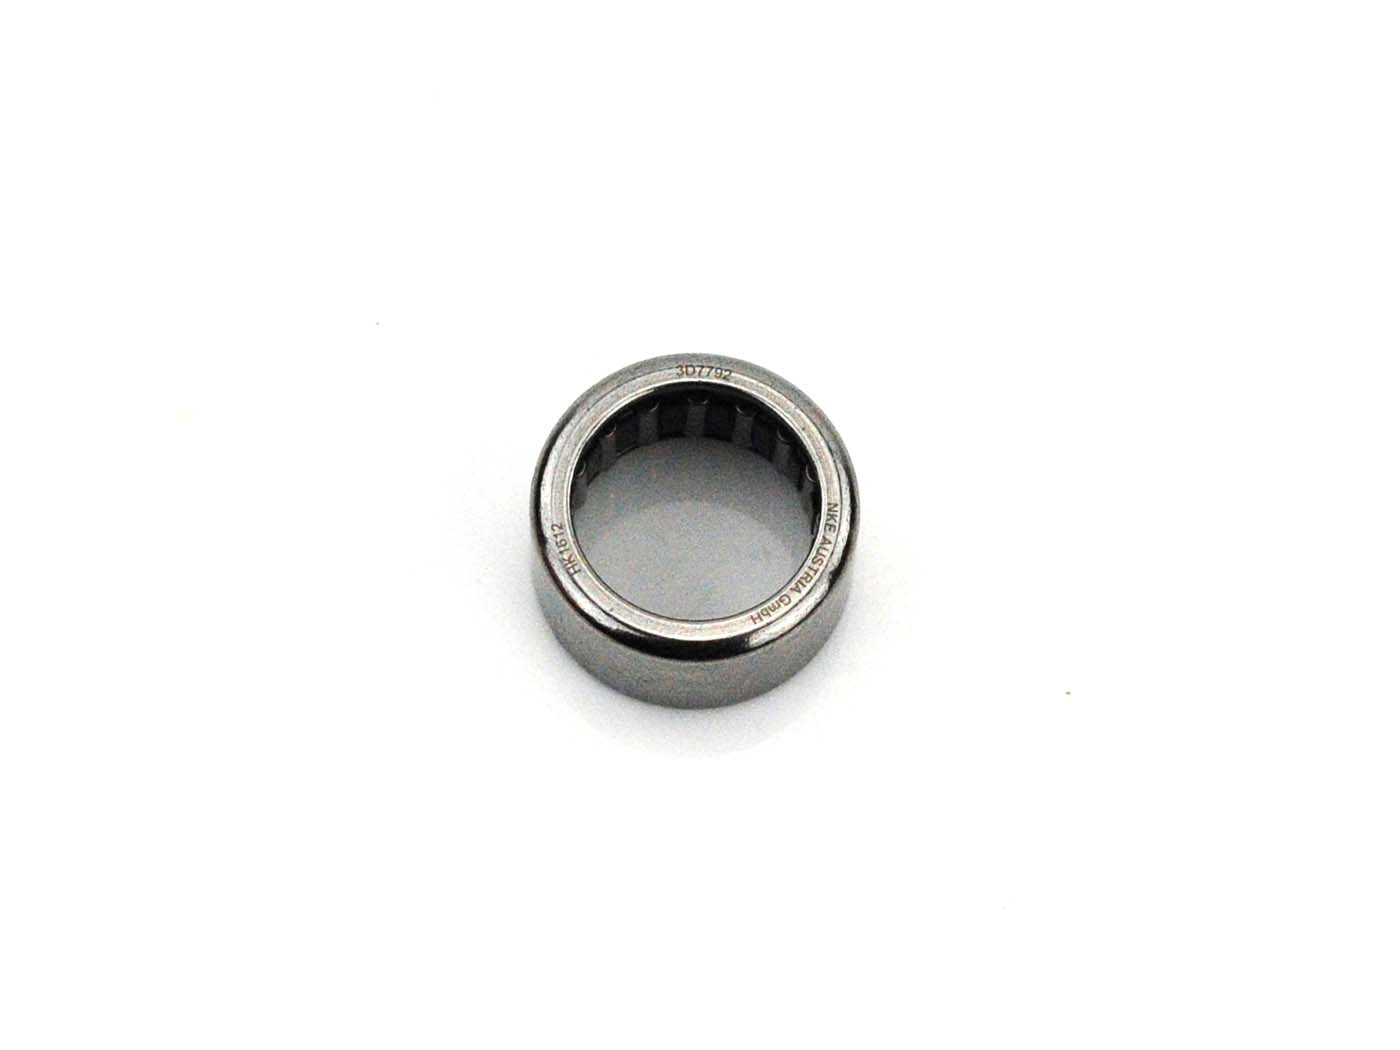 Pulley Needle Bearing For Moped 712 F Luxus And Komfort 25, Super Moped 713 Super-Luxus 40, 725 Mini-Bike, 726 Mokick 730, 731 Sport, 732 Sport